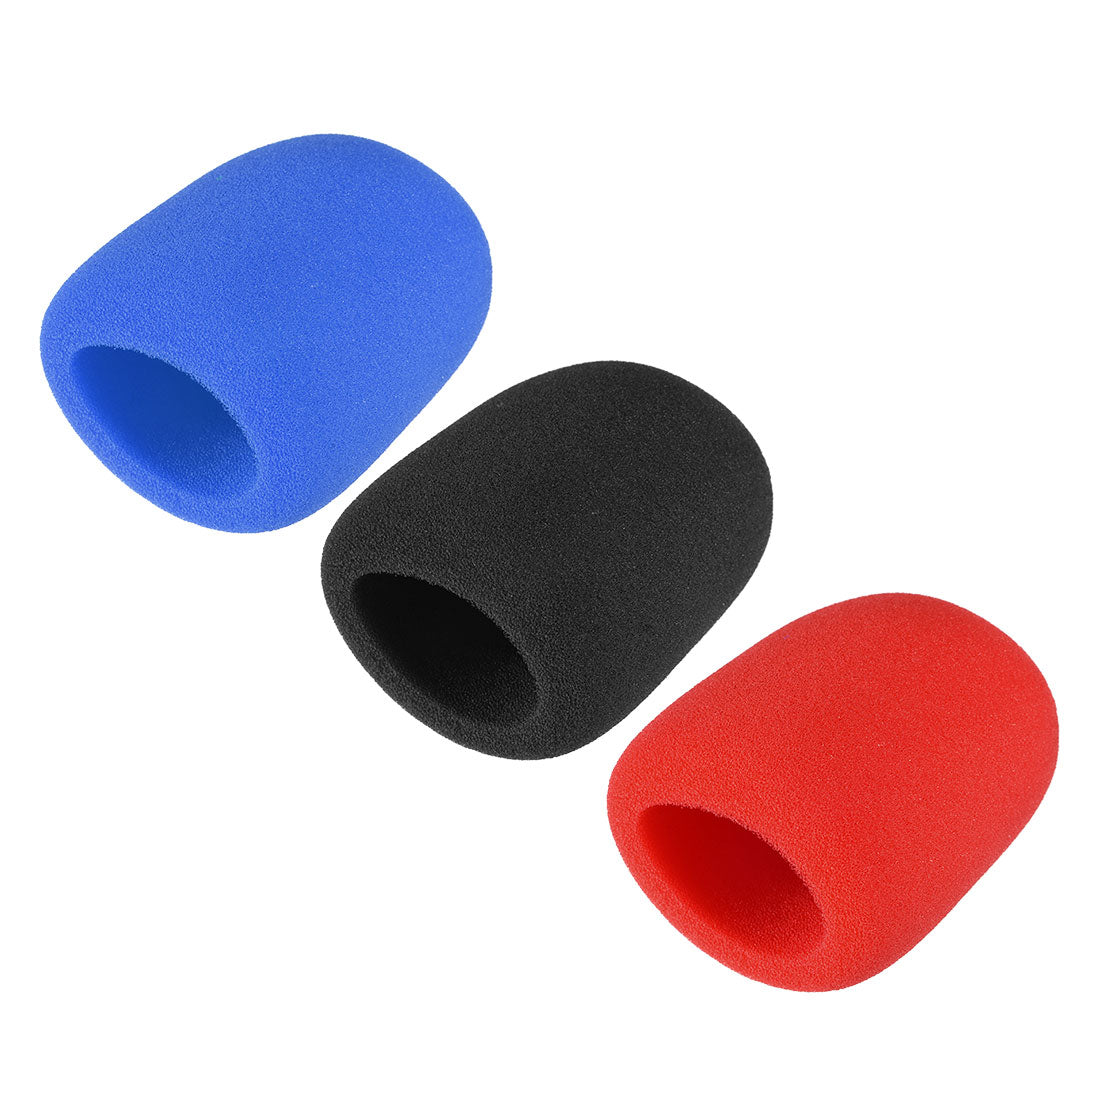 uxcell Uxcell 3PCS Thicken Sponge Foam Mic Cover Handheld Microphone Windscreen Black Red Blue for KTV